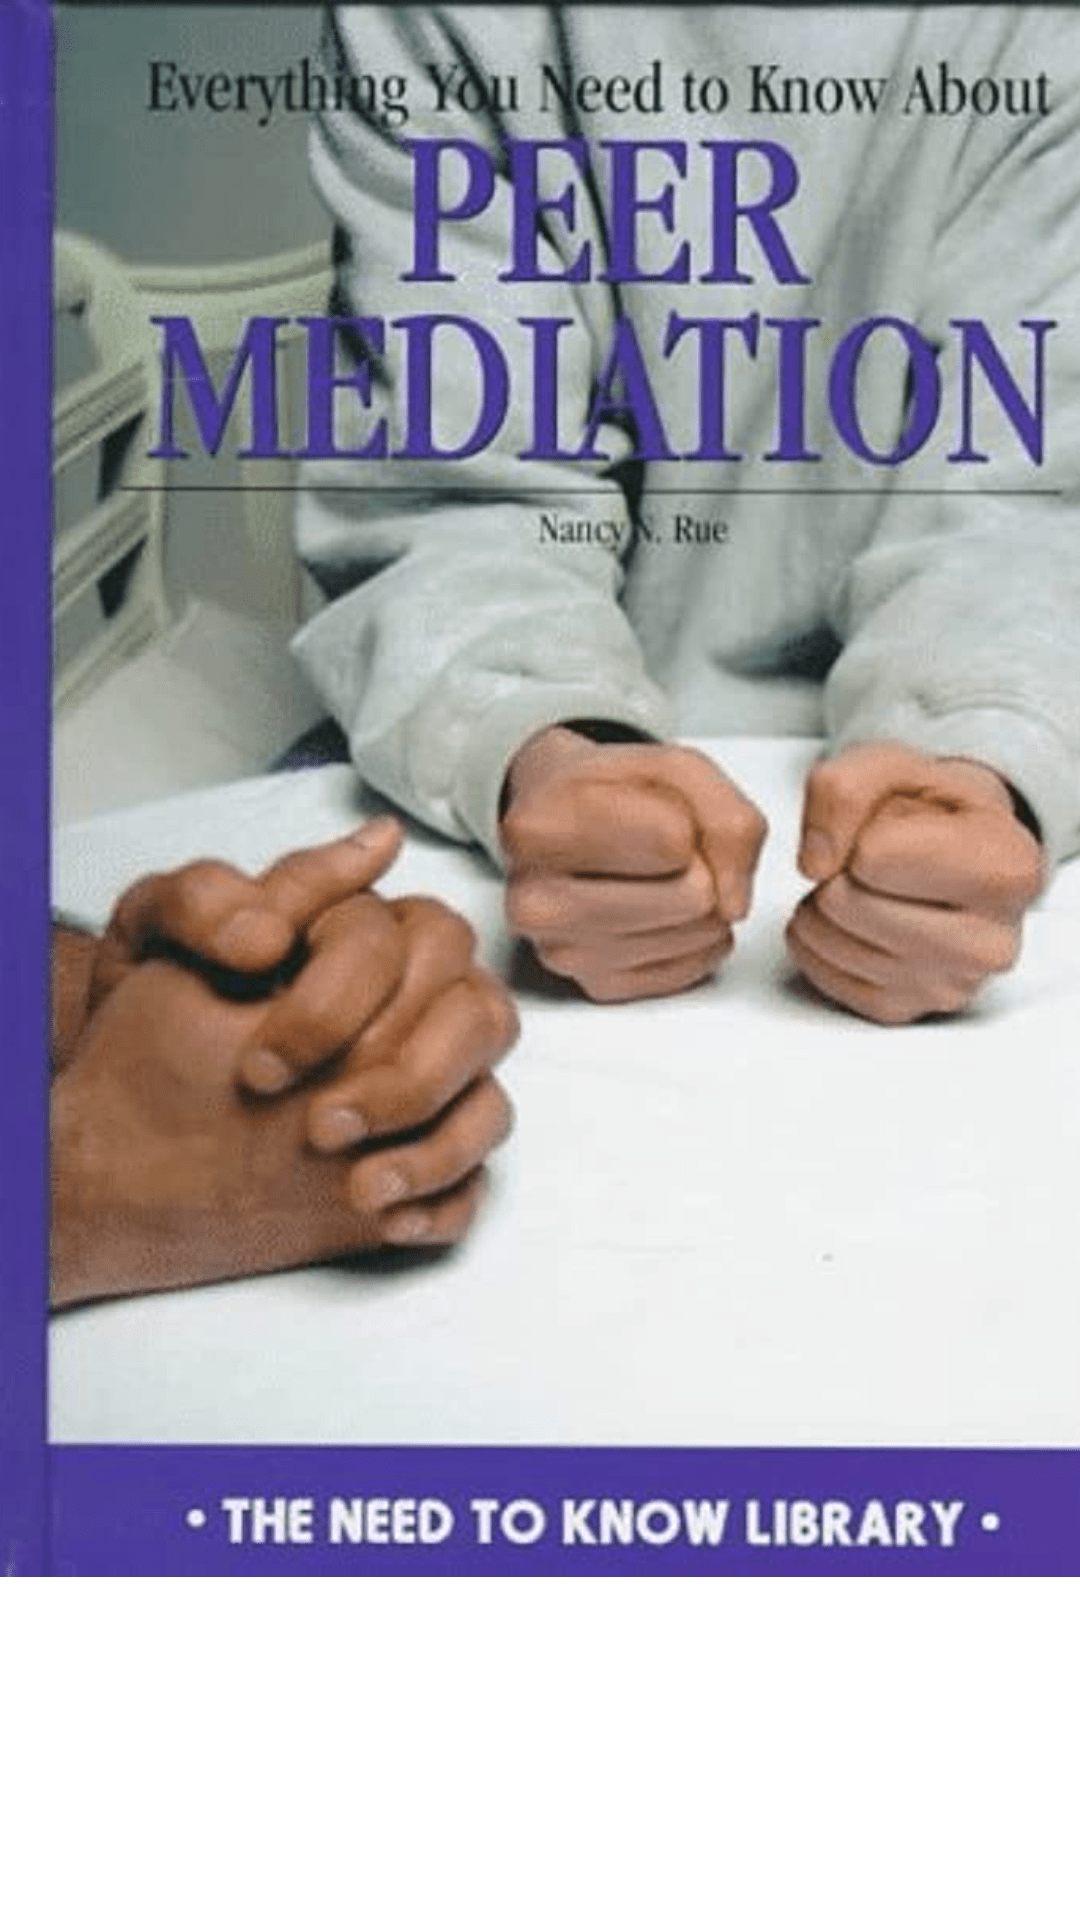 Everything You Need to Know About Peer Mediation